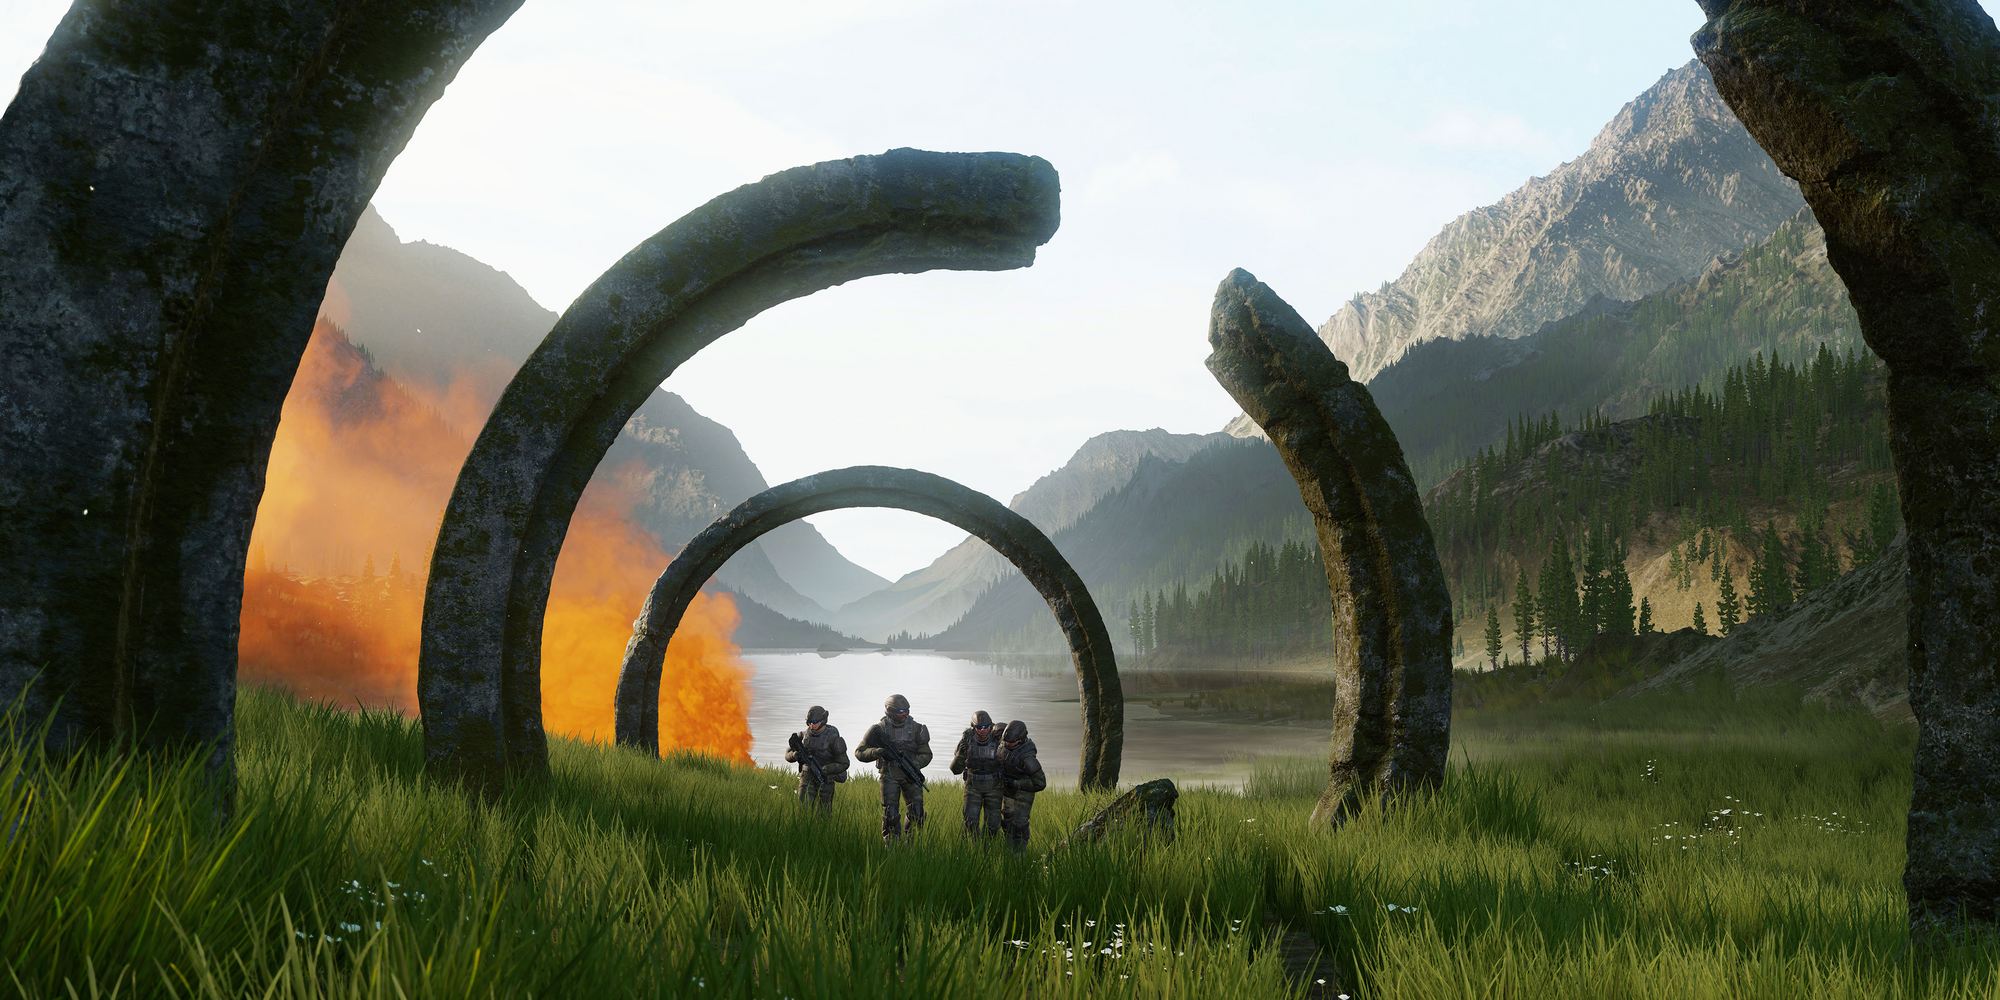 Halo Infinite Trailer Image marines walking through field framed by stone rings.